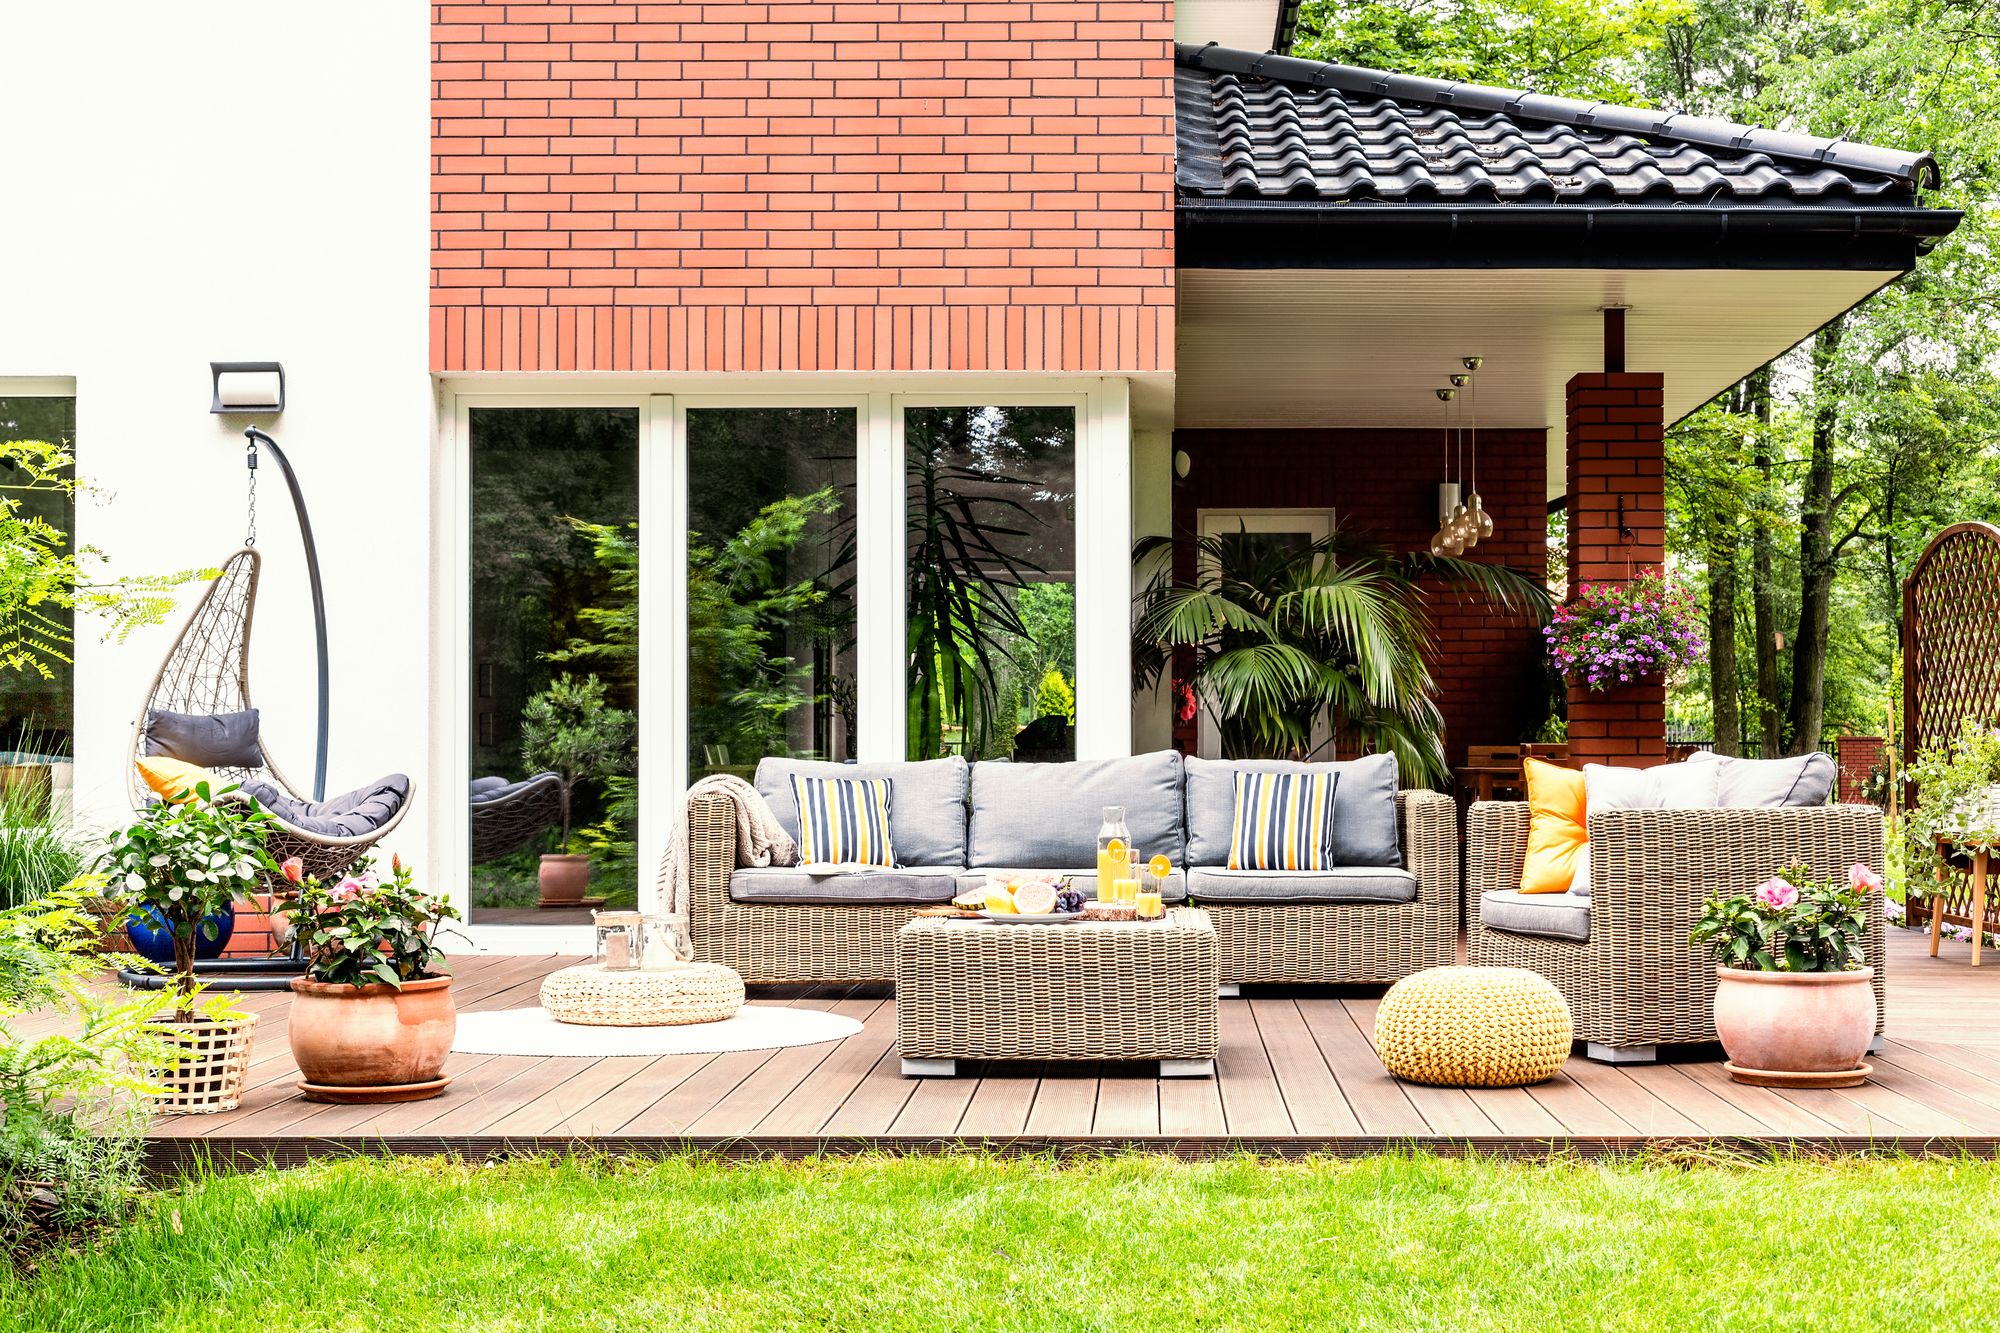 Beautiful Terrace With Garden Furniture and Plants